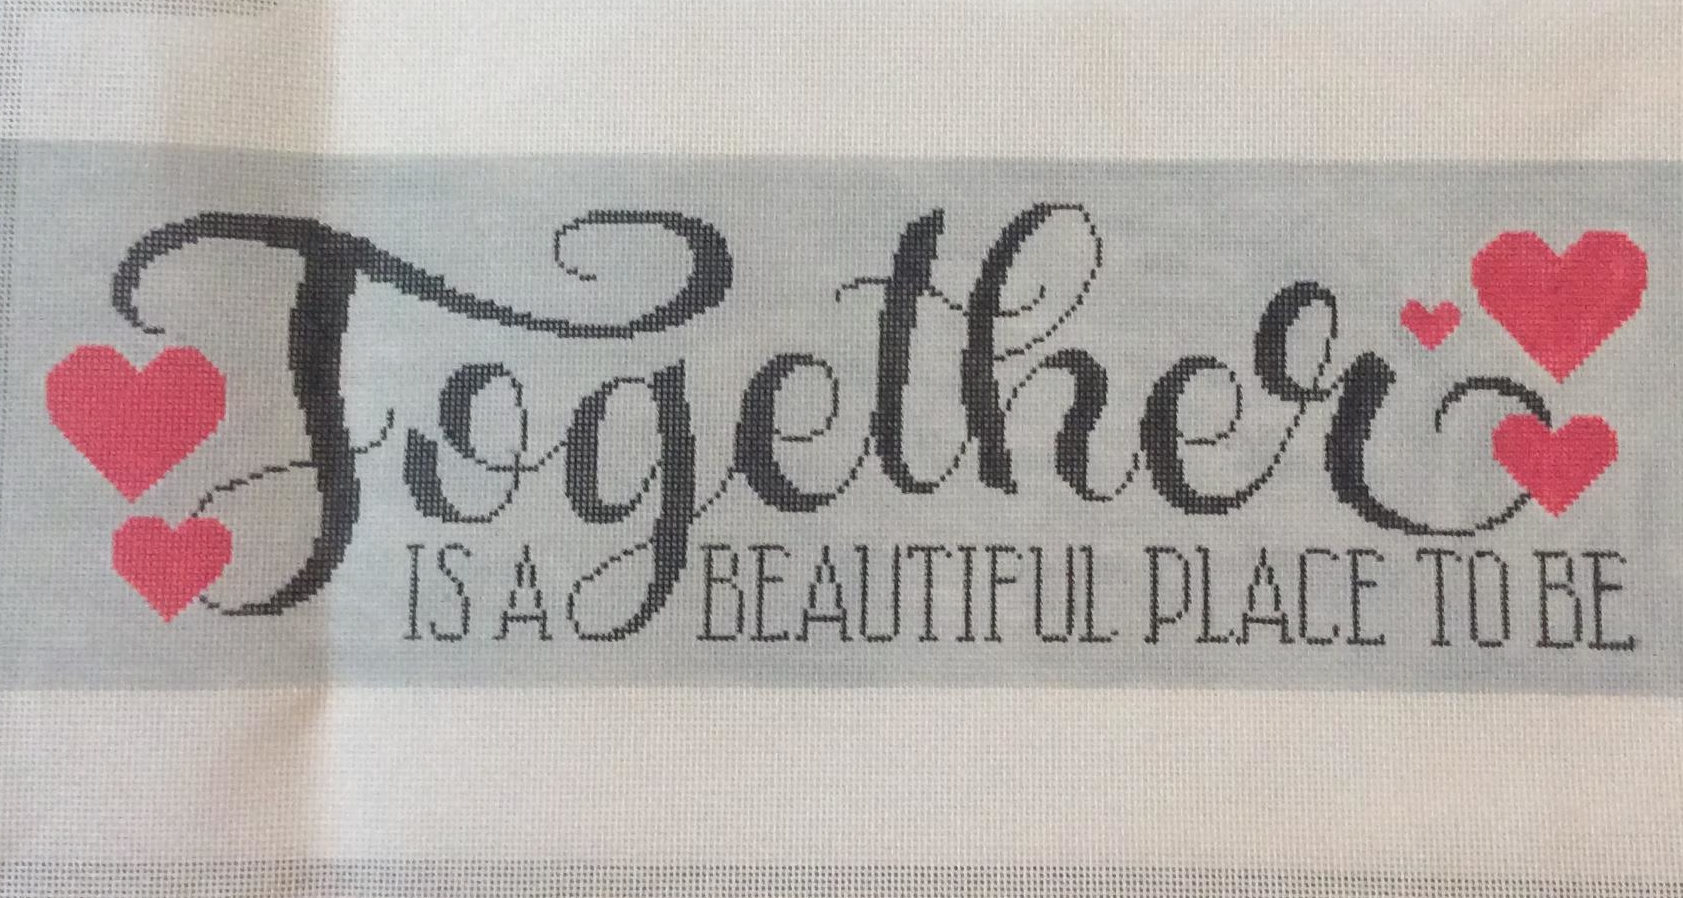 Together is a Beautiful Place